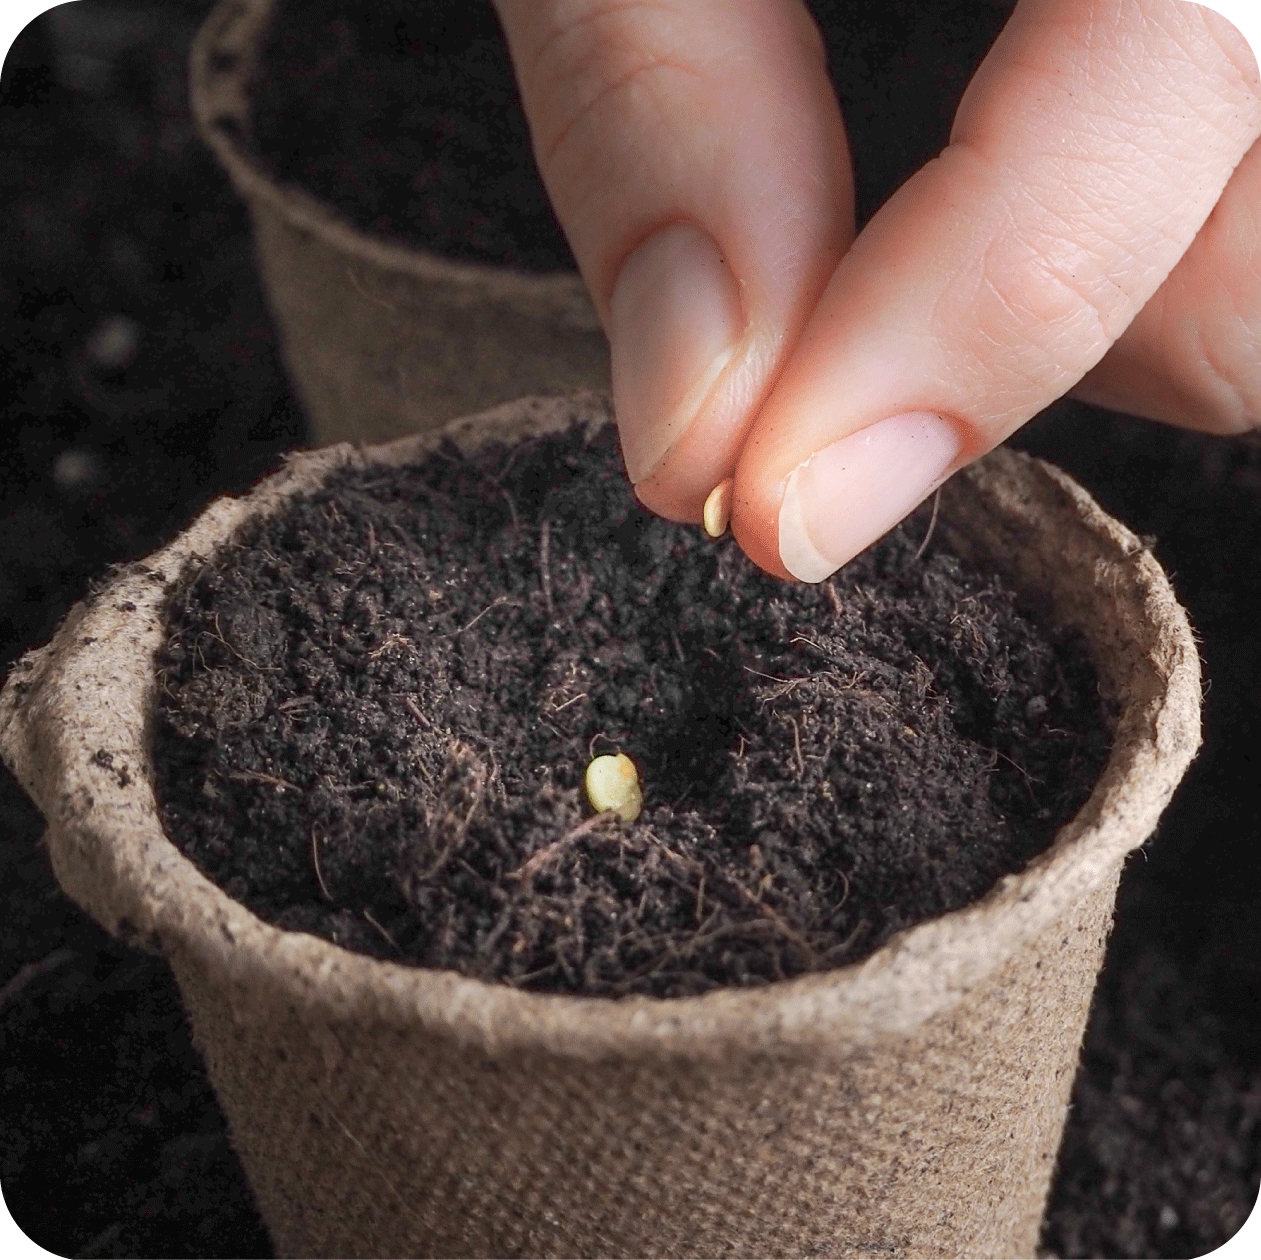 Fingers placing small seeds in a pot